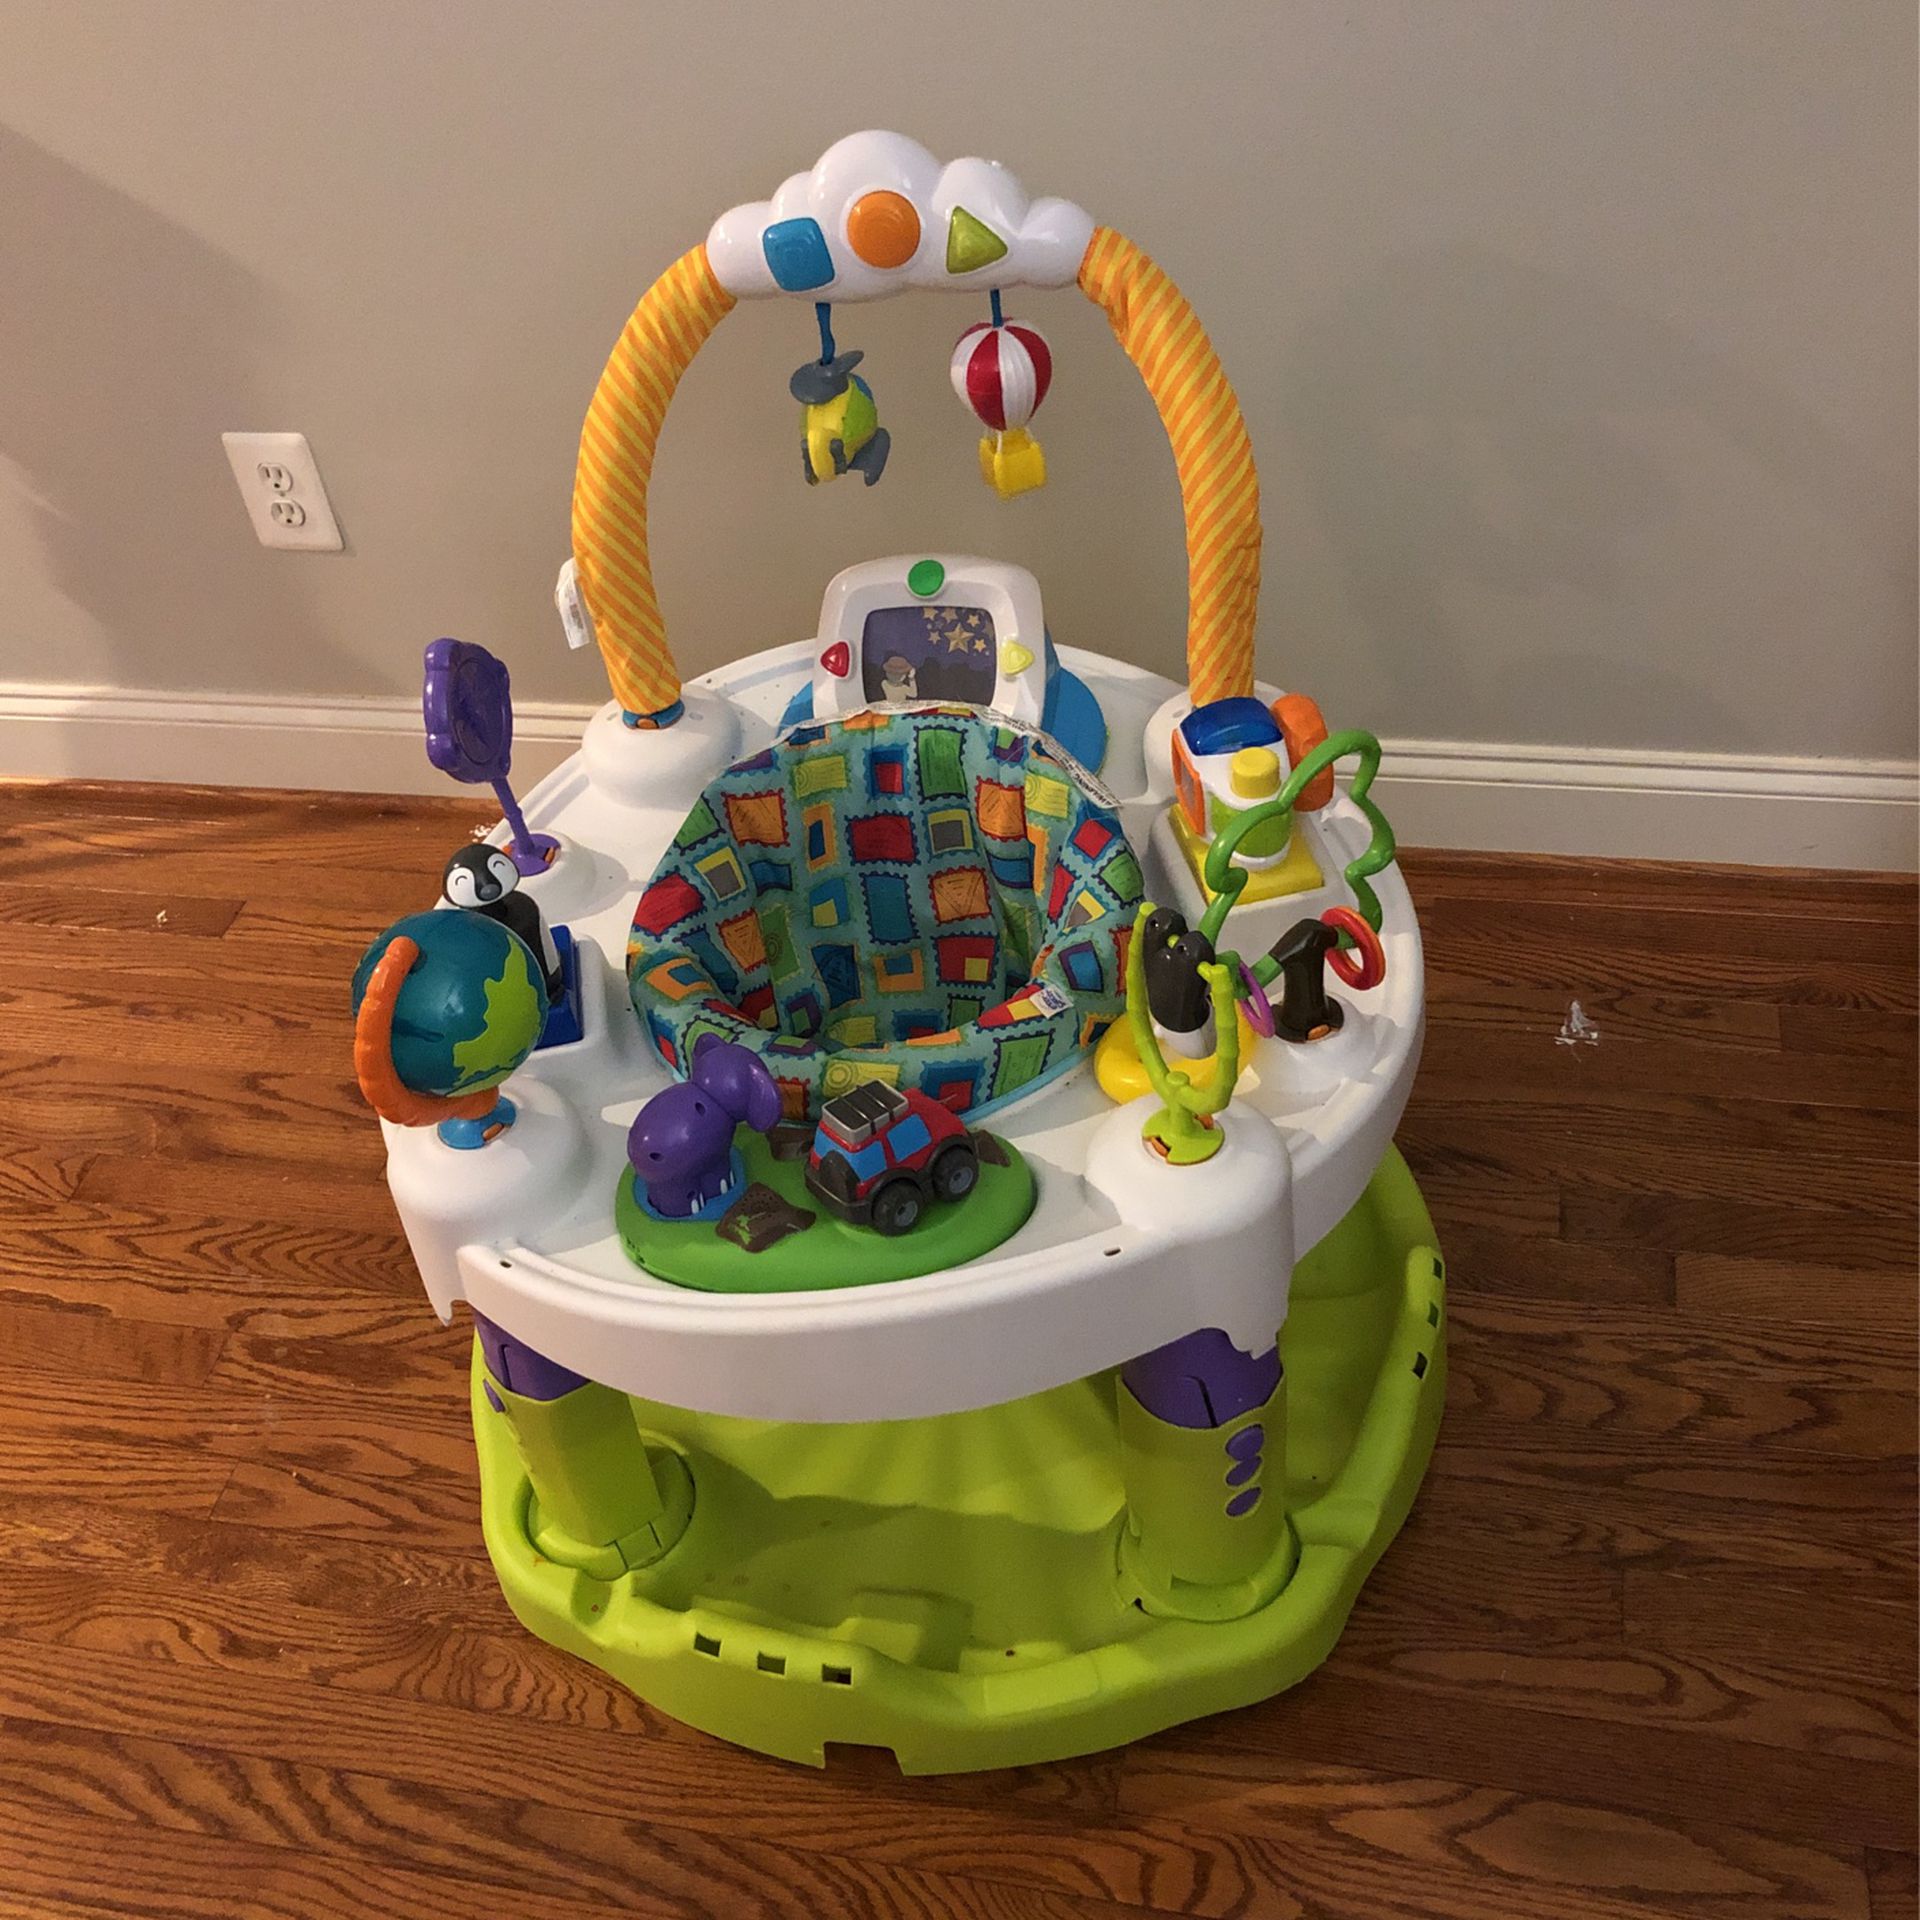 Evenflo Baby To Toddler Toy 3-In-1 Sit-To-Stand Activity Center 